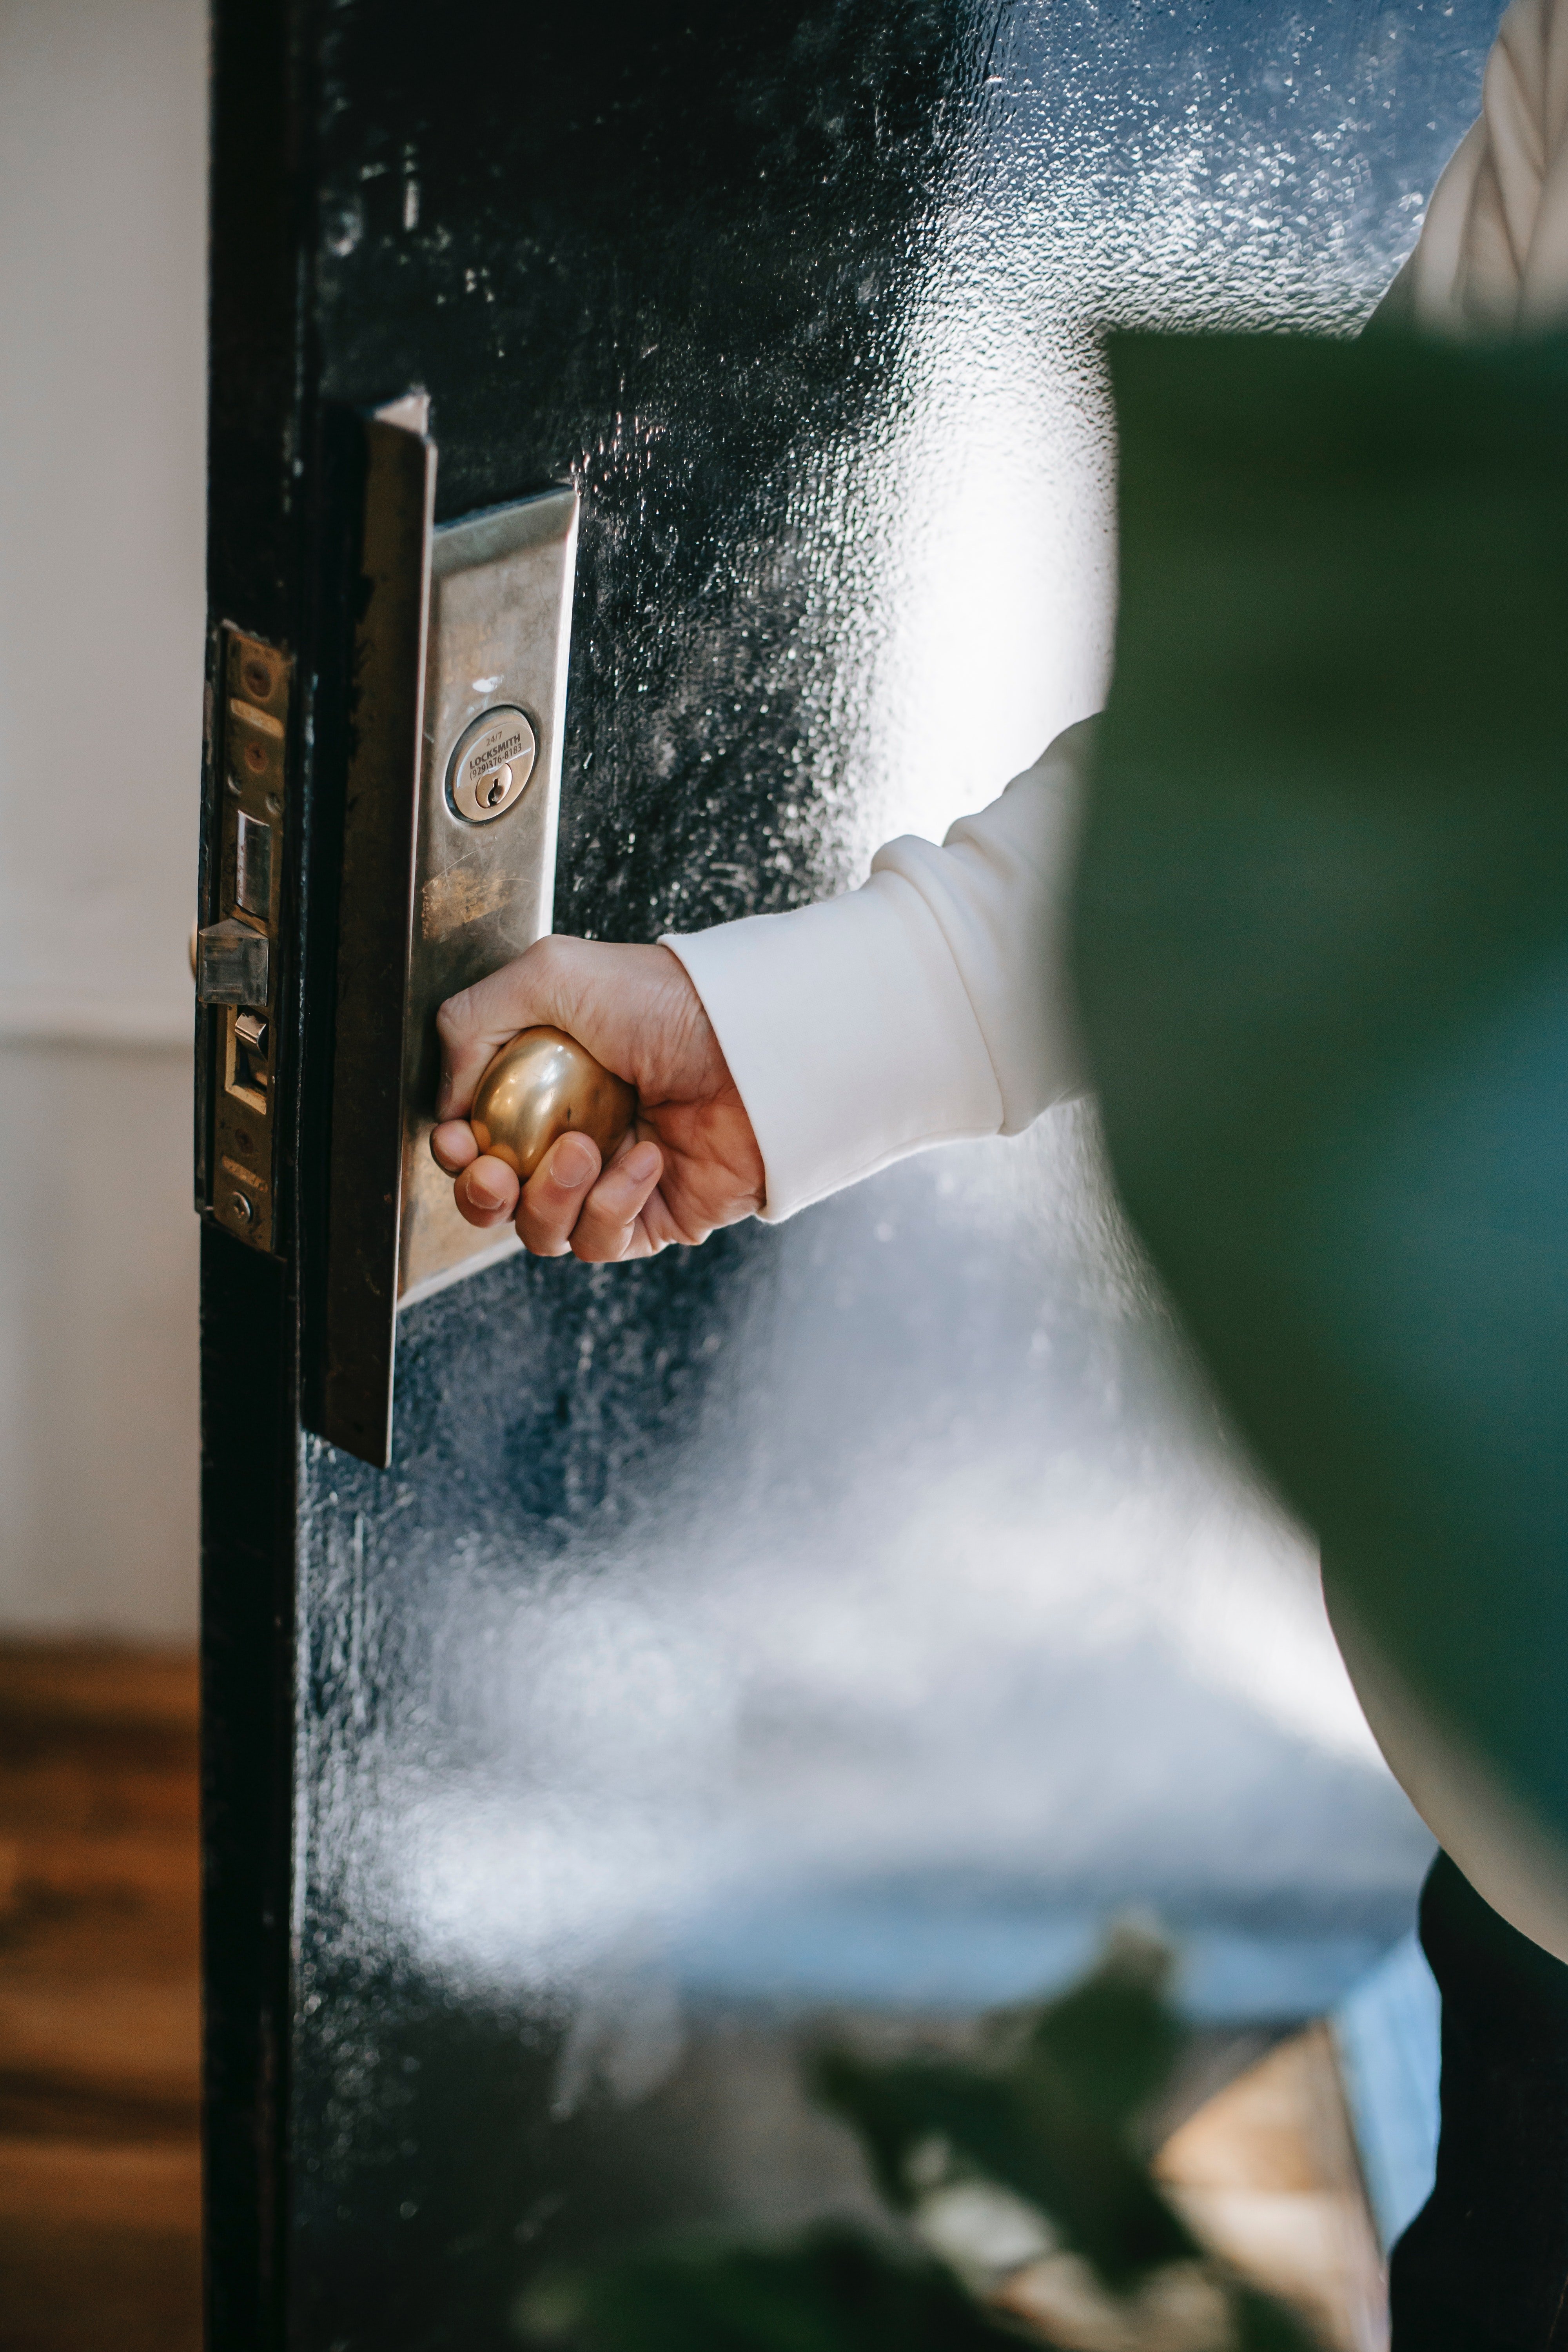 To Matthew's surprise, his wife appeared at the door. | Photo: Pexels